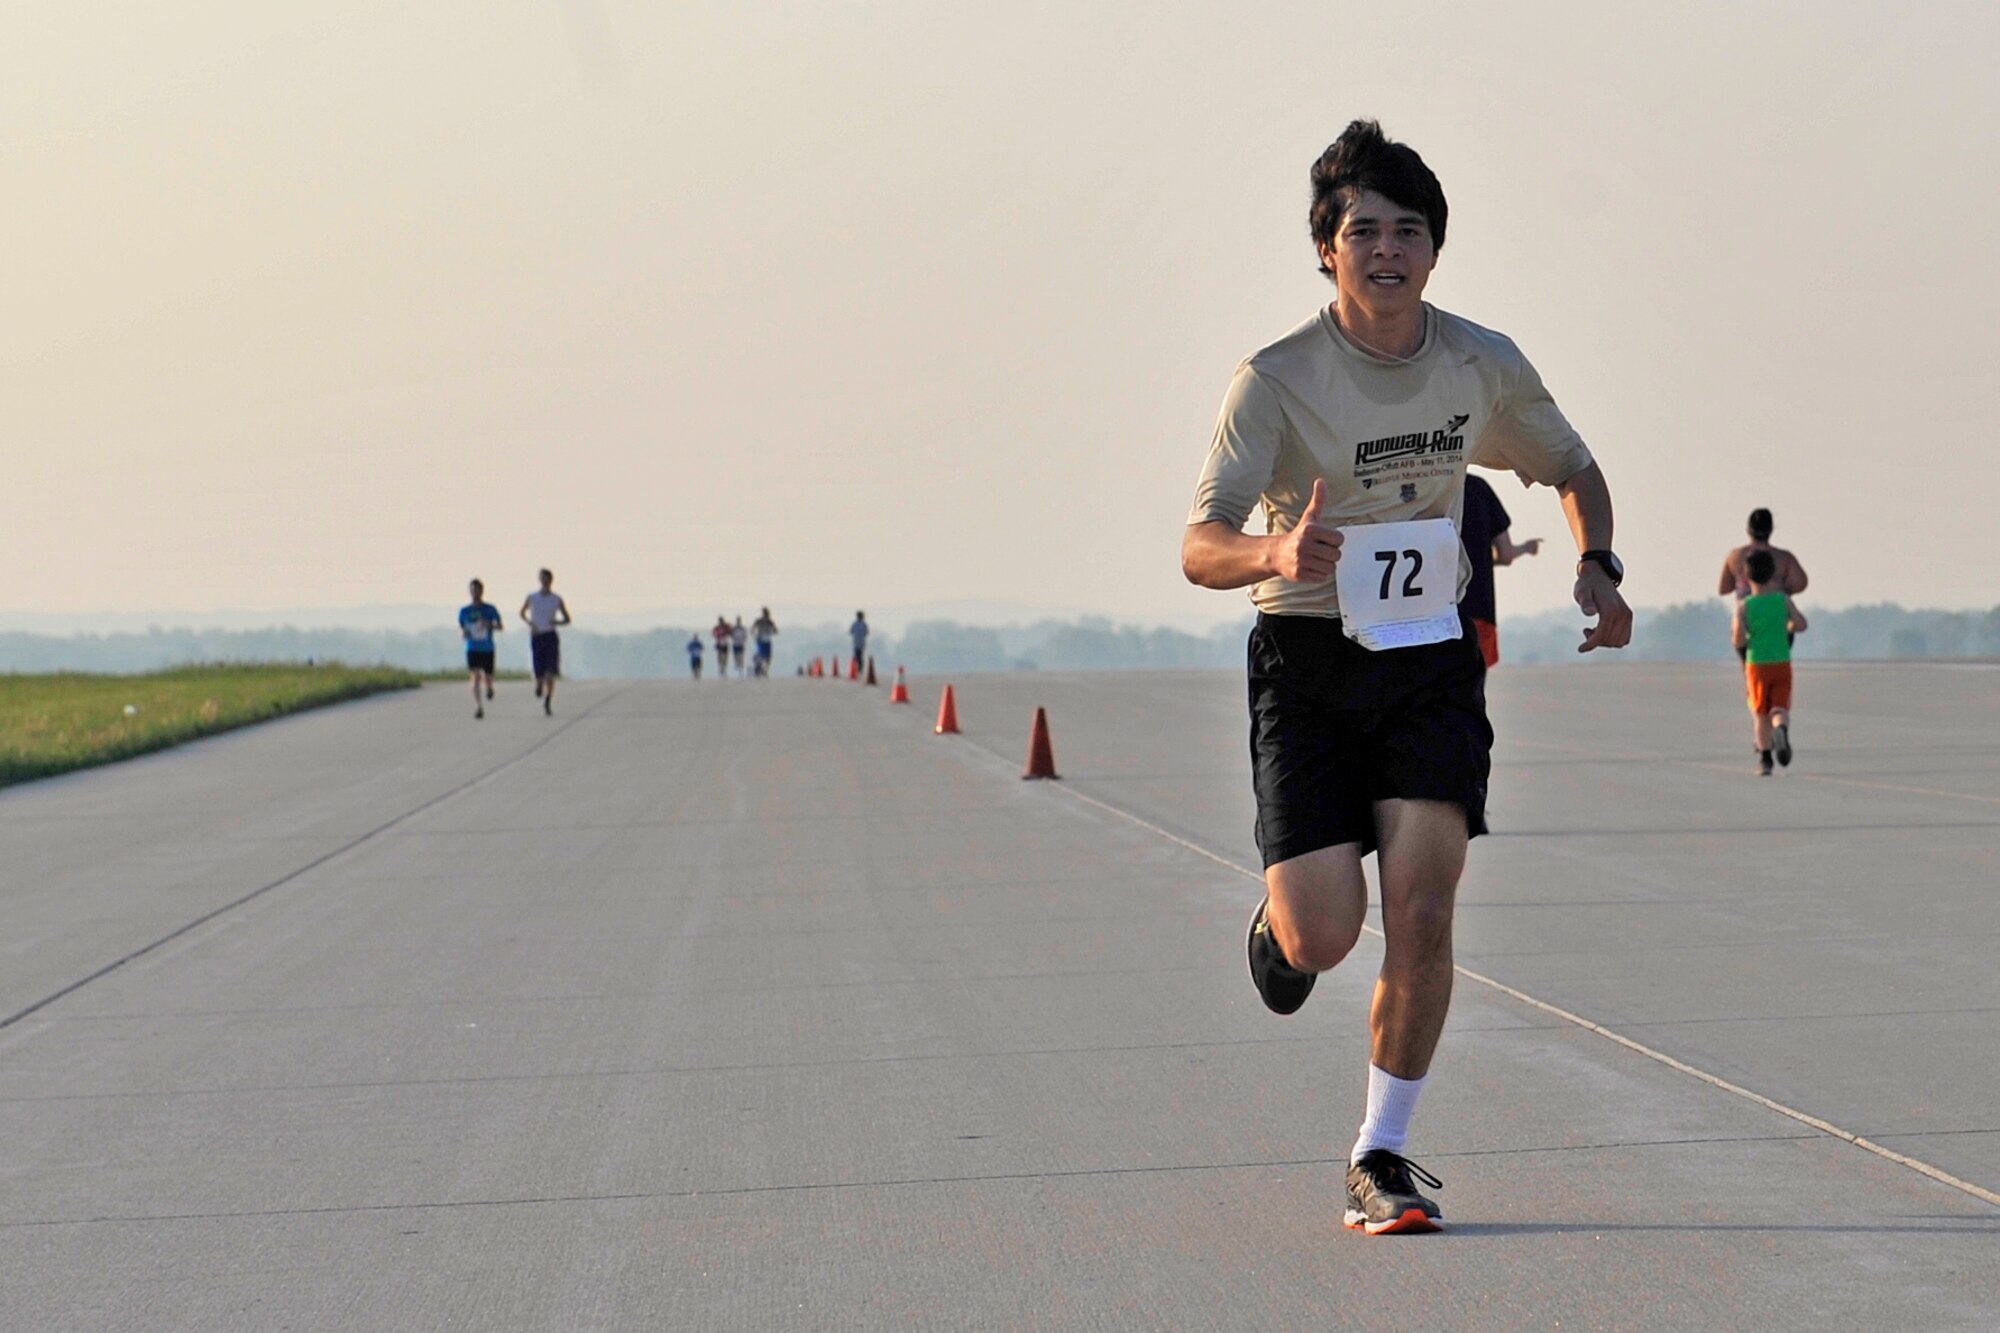 Ethan Scott from Blair, Neb., runs strong down the flightline for the eighth annual Bellevue-Offutt Runway Run at Offutt Air Force Base, Neb., May 8, 2016. Ethan placed first in the 18 and under age division. More than 100 runners participated in this unique seven-mile race from Bellevue, Neb. down the Offutt flightline and back. (U.S. Air Force photo by Jeff Gates)